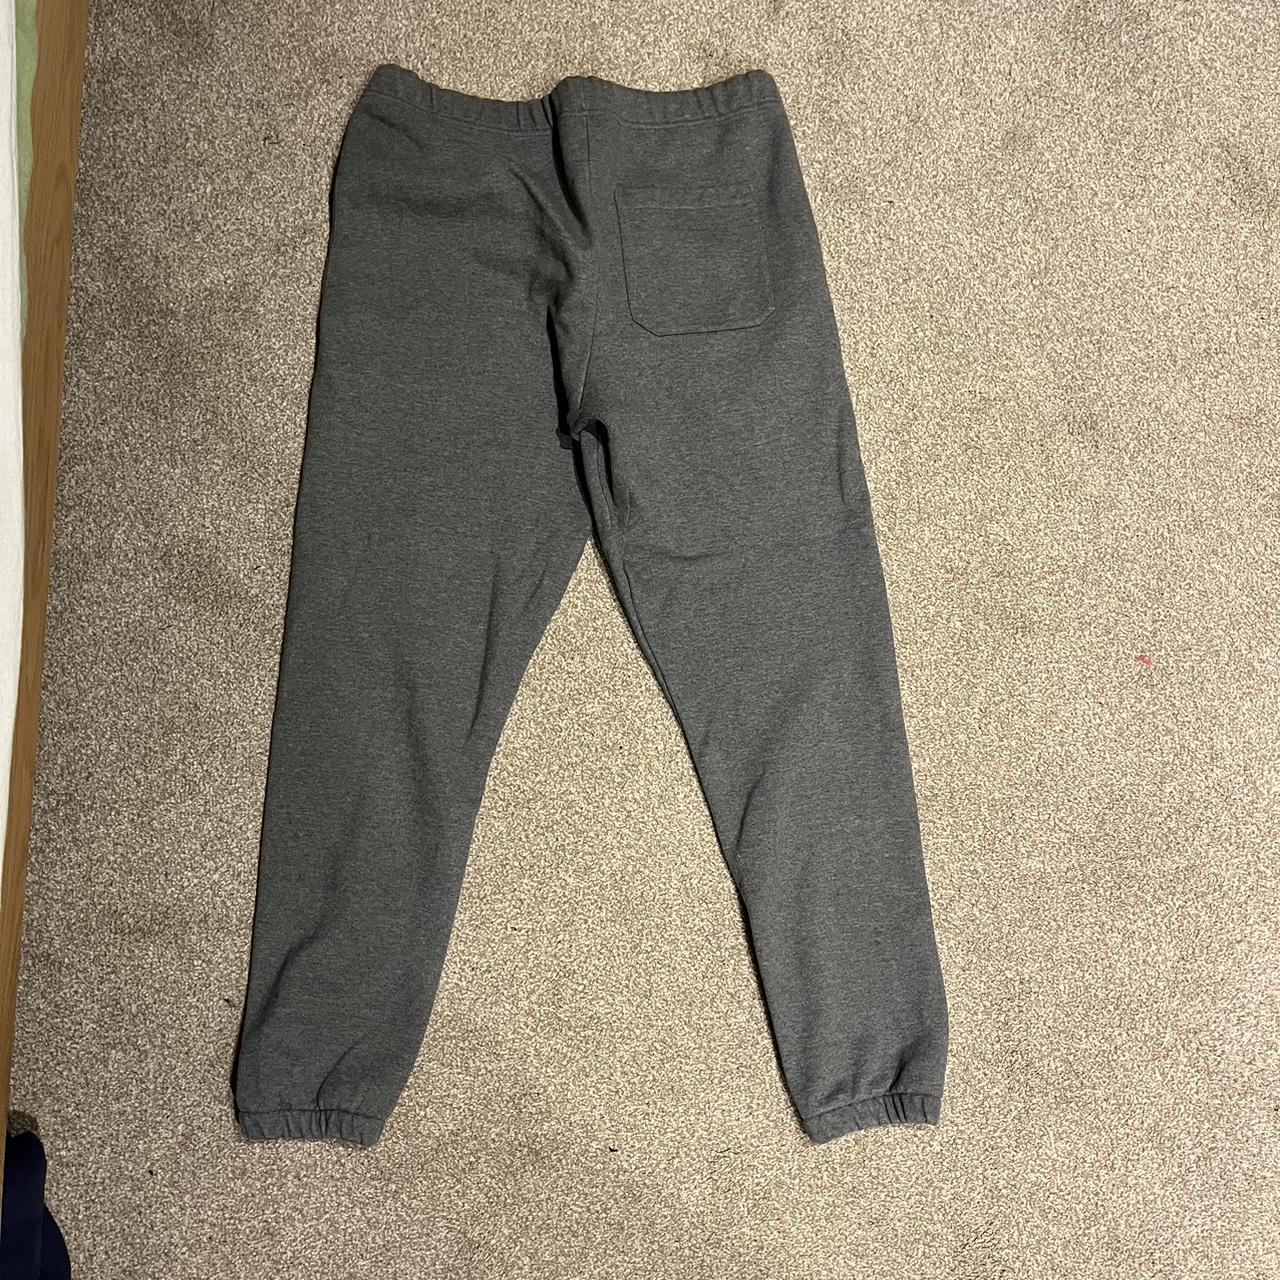 Carhartt Grey Chase sweatpants Condition: Good with... - Depop